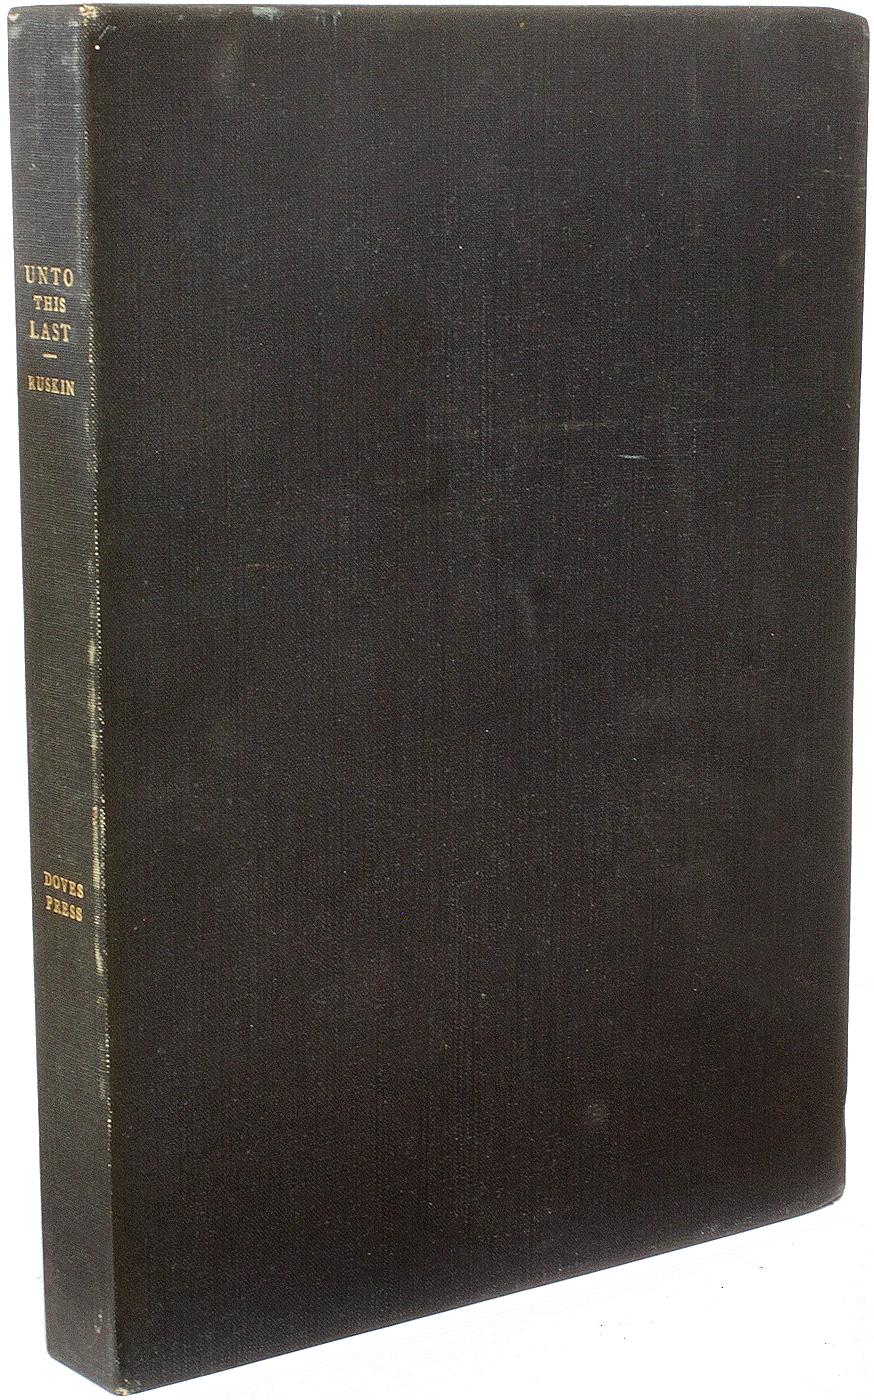 Leather John RUSKIN - Unto This Last - THE DOVES PRESS - 1907 - JOHN DRINKWATER'S COPY For Sale